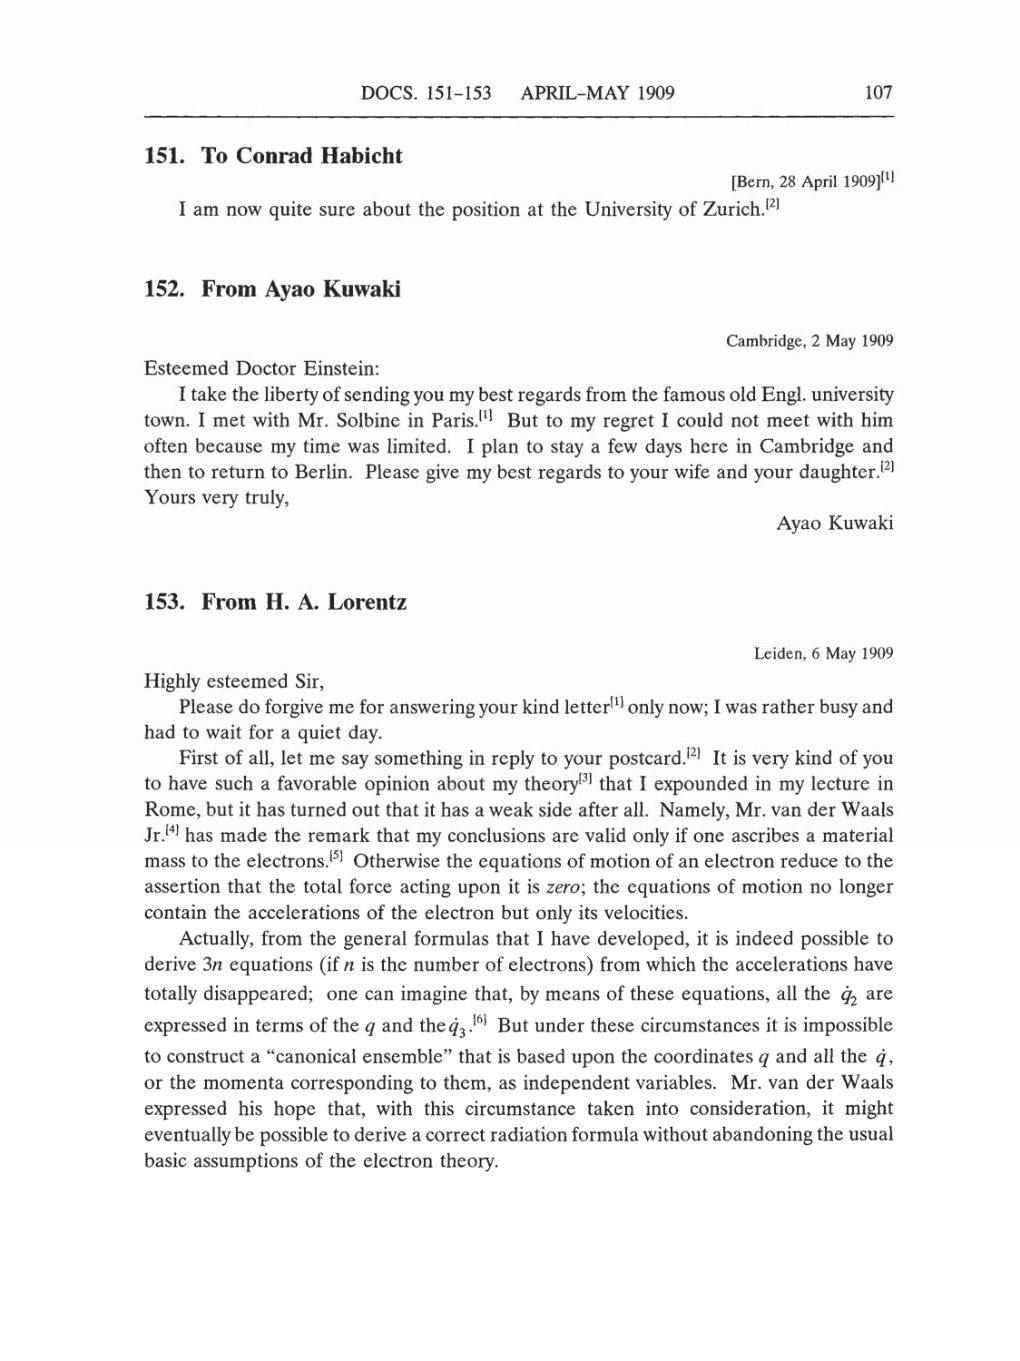 Volume 5: The Swiss Years: Correspondence, 1902-1914 (English translation supplement) page 107